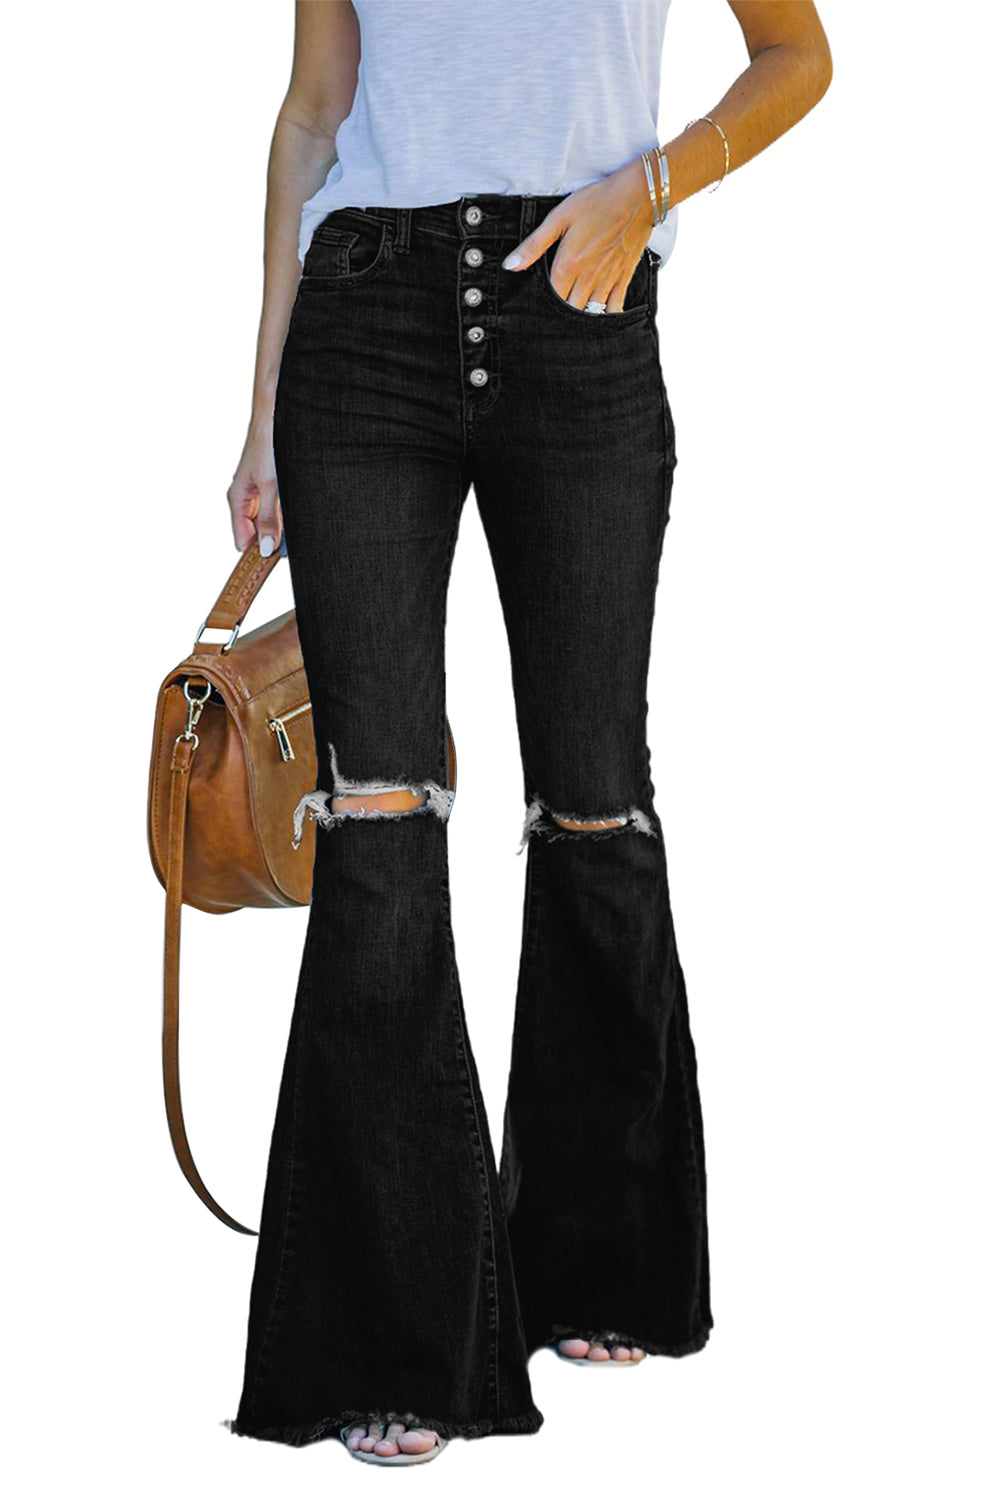 Black Casual Ripped Cut Out Flare Jeans Jeans JT's Designer Fashion